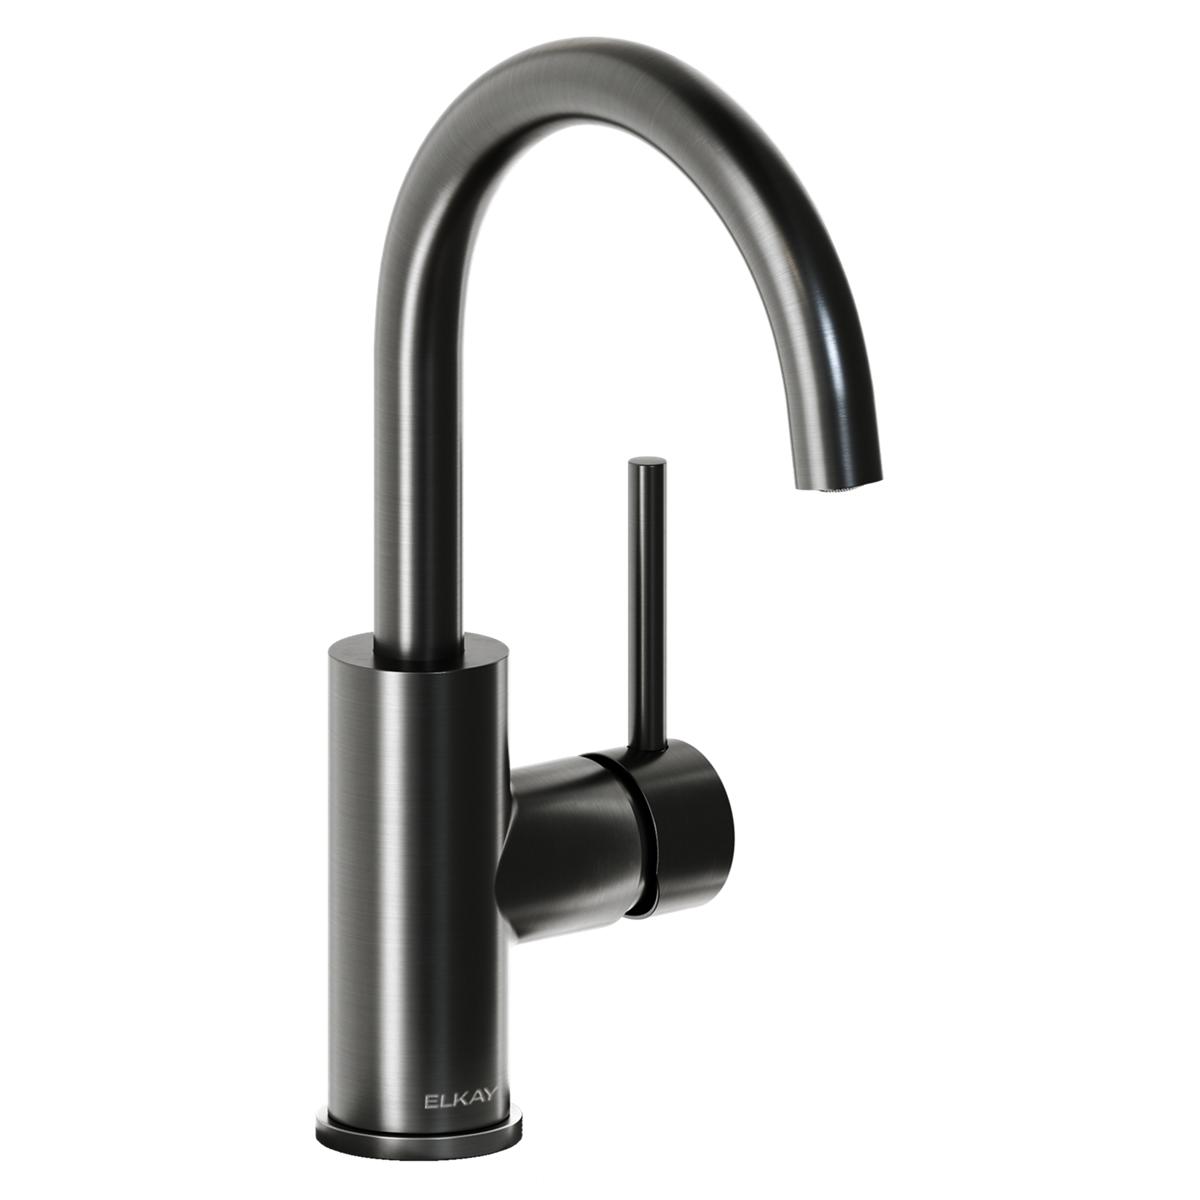 Elkay Avado Single Hole Bar Faucet with Lever Handle